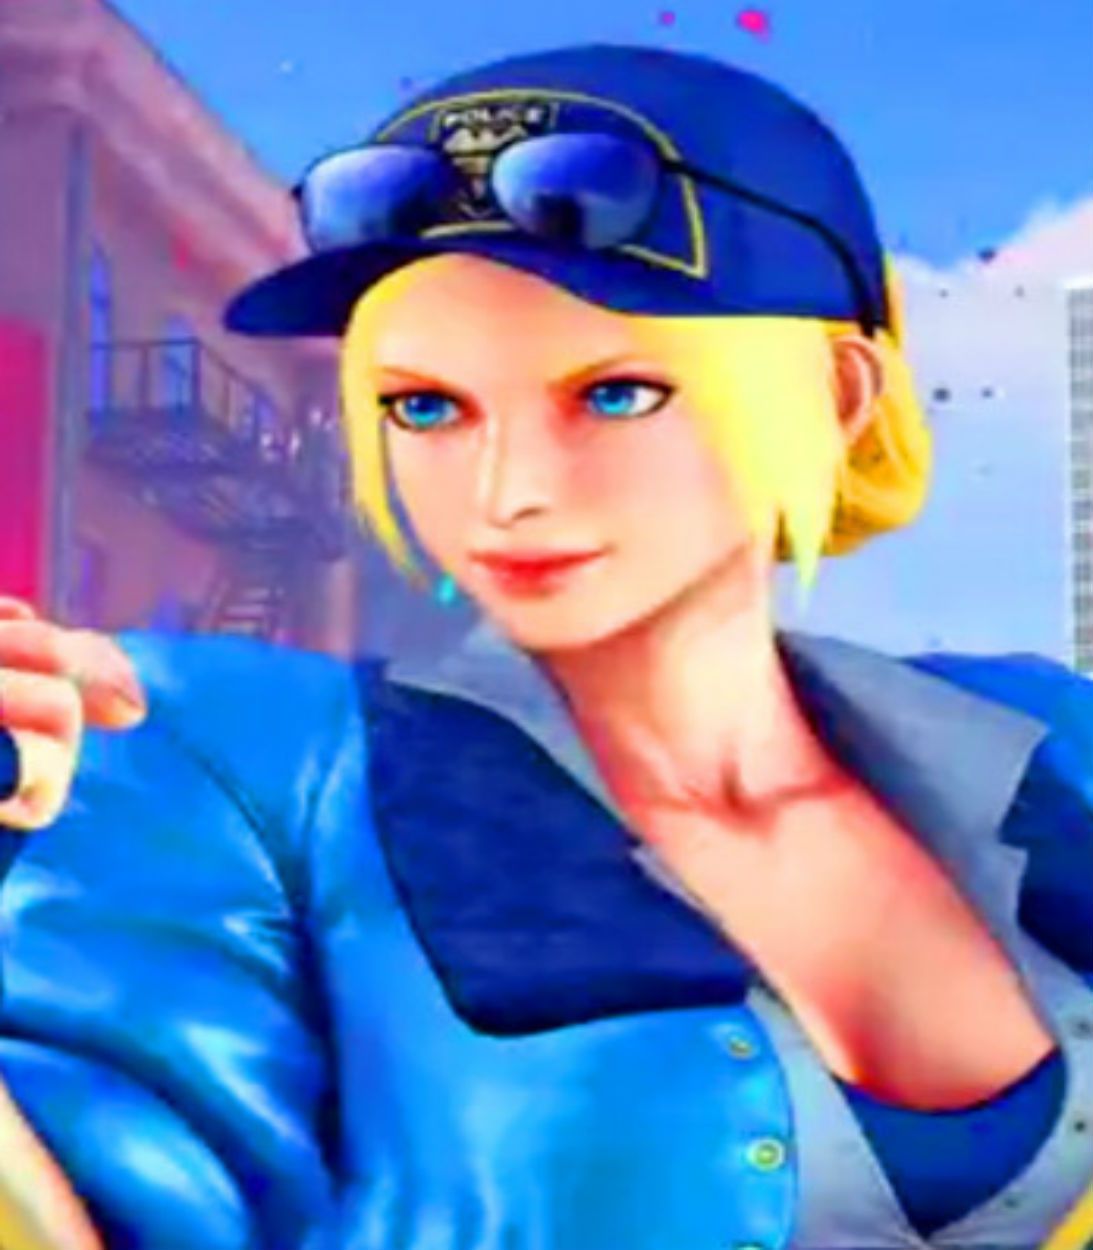 Lucia's costume in Street Fighter 5